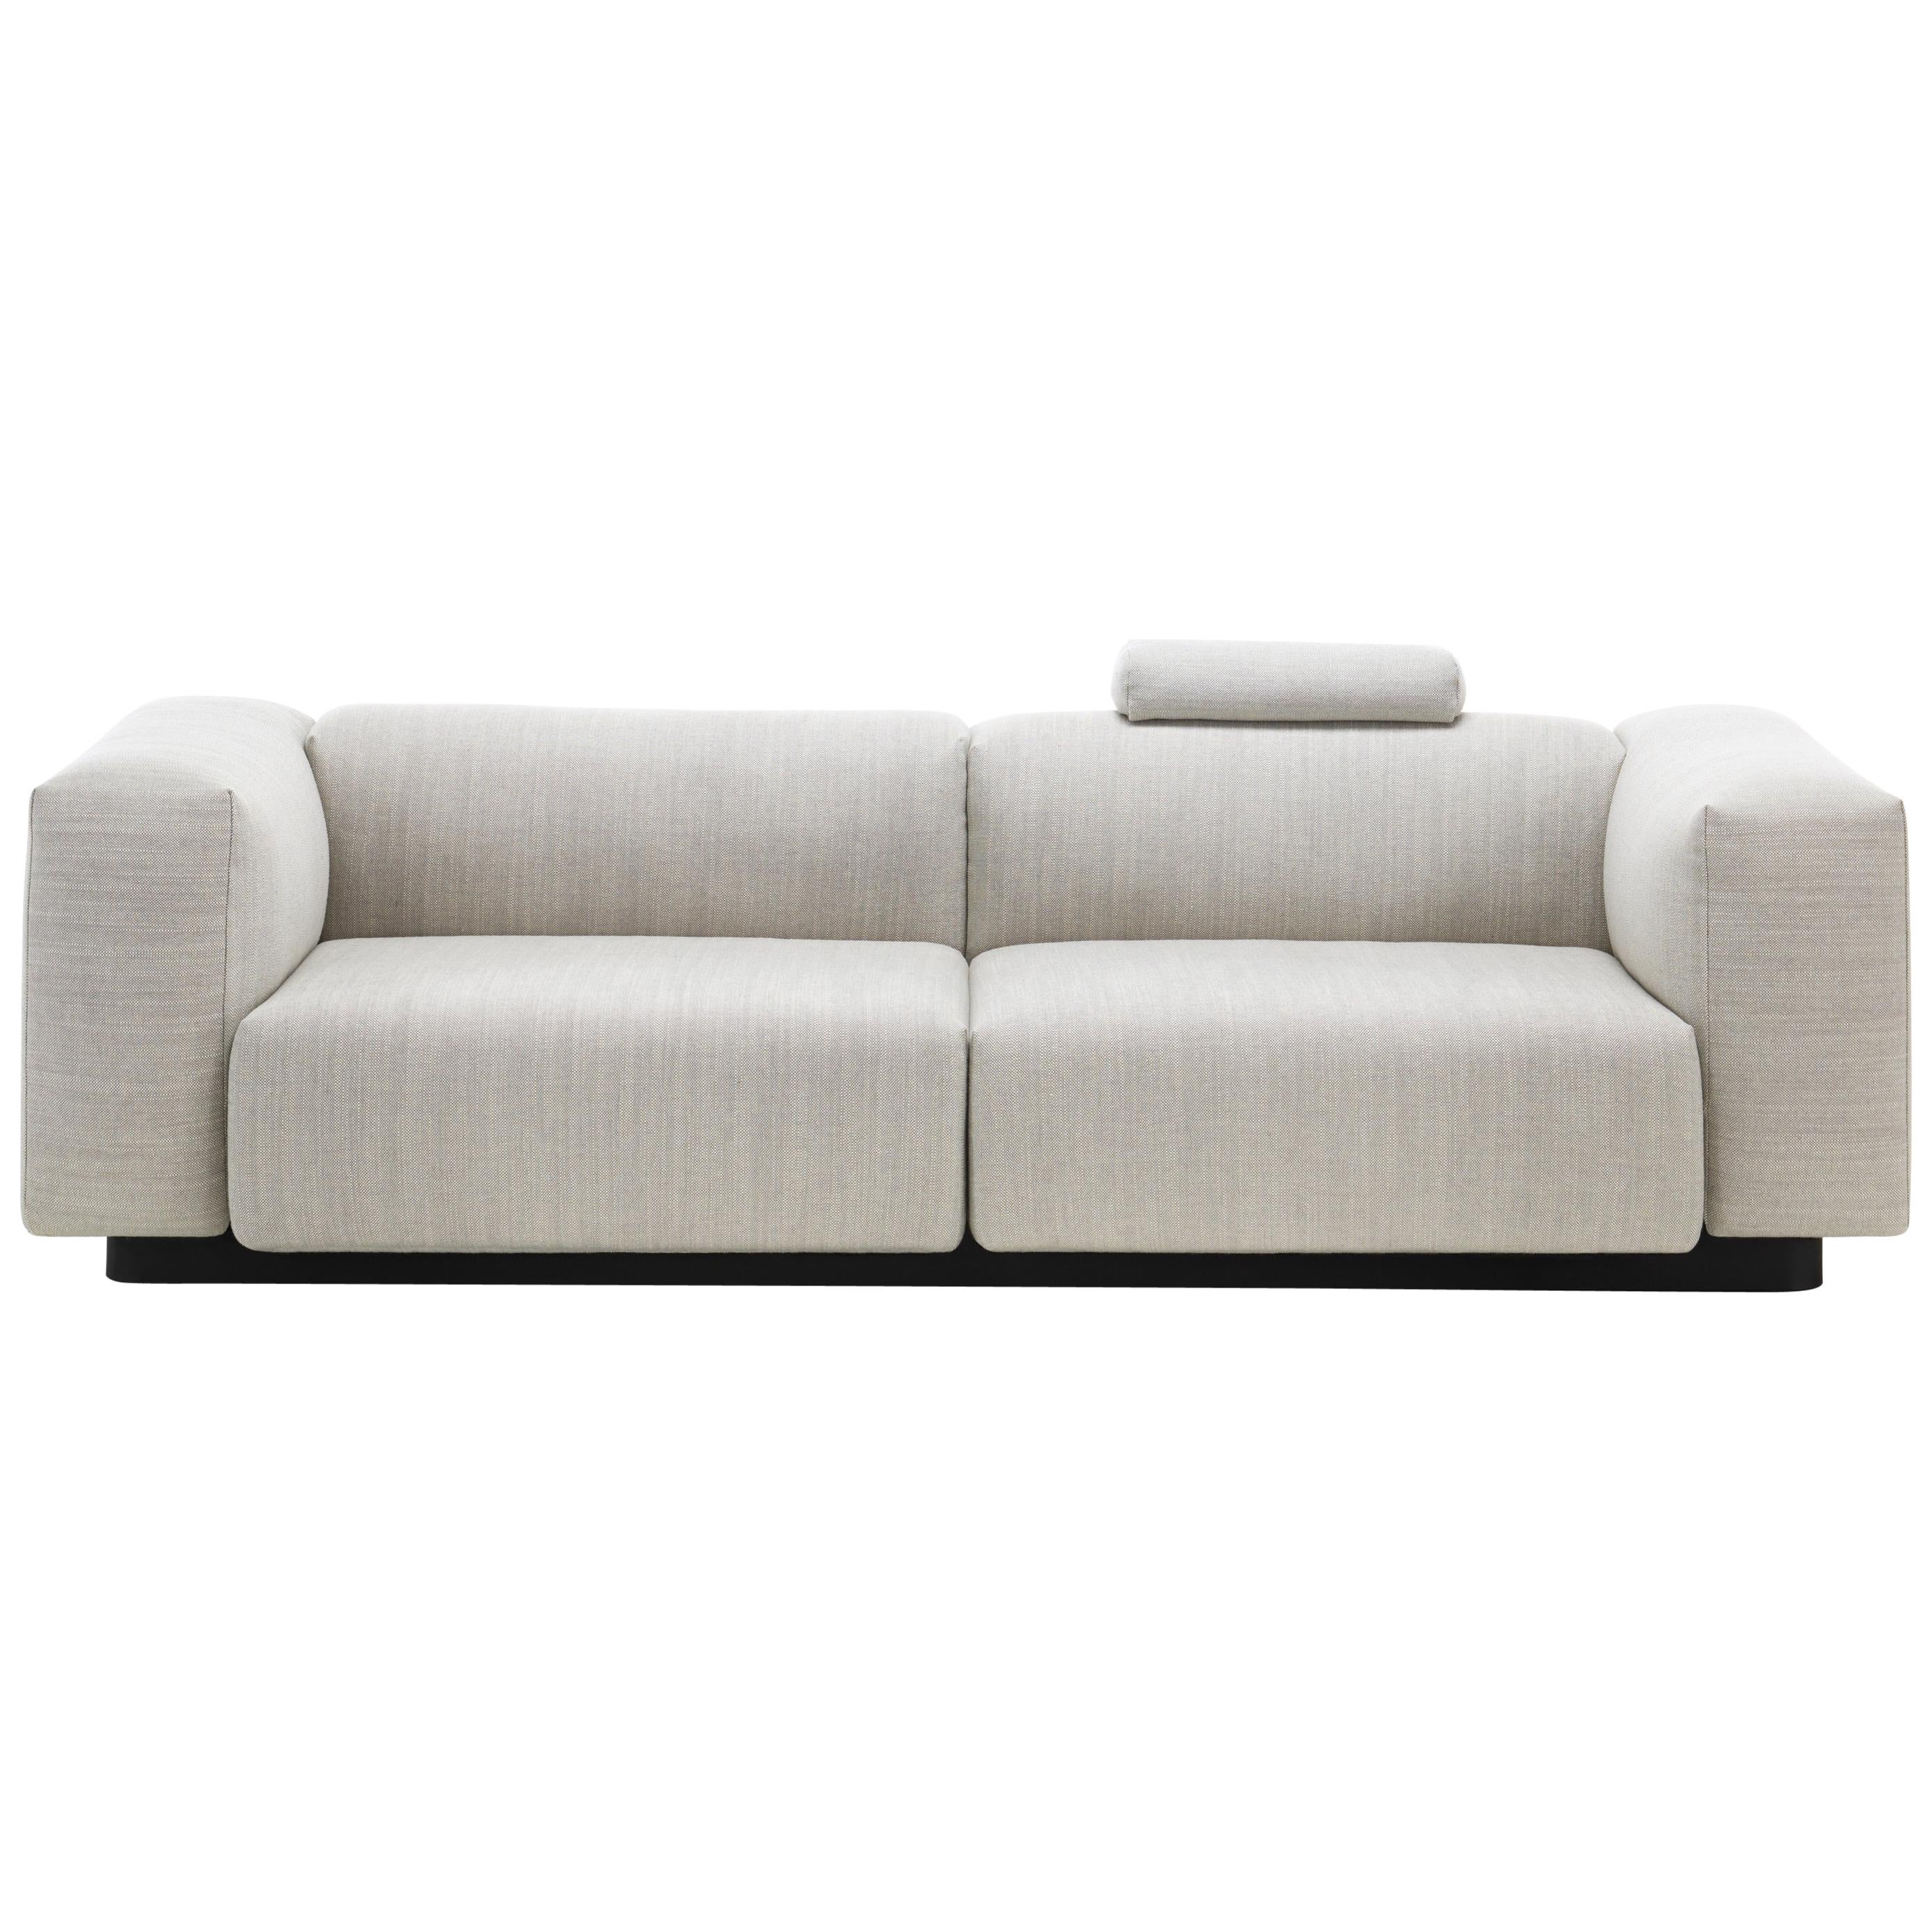 Vitra Soft Modular Two-Seat Sofa in Pearl Reed with Neck Cushion im Angebot